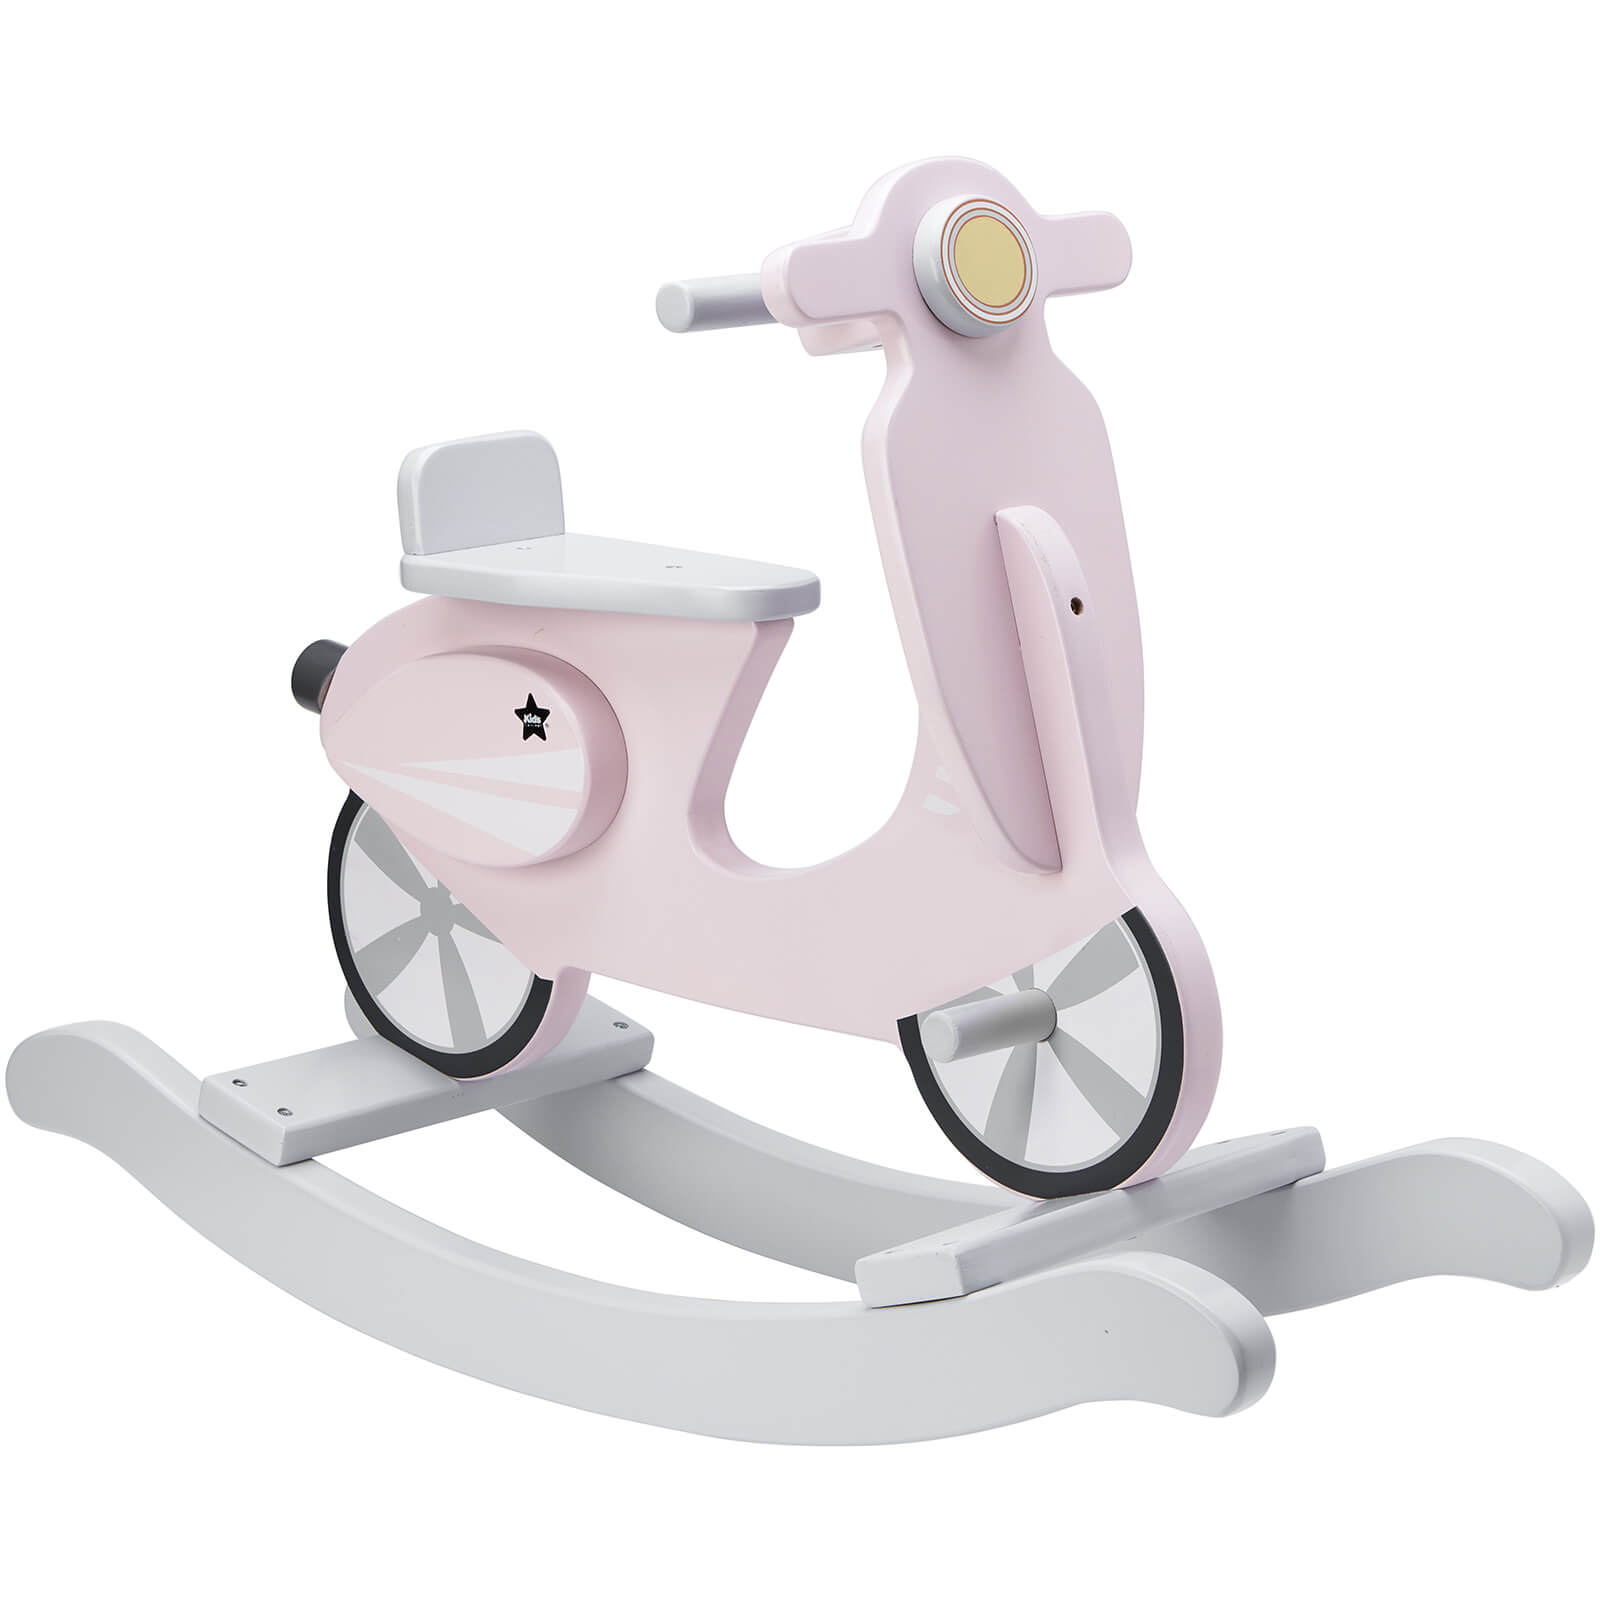 Kid's Concept - Rocking Scooter - Pink/White